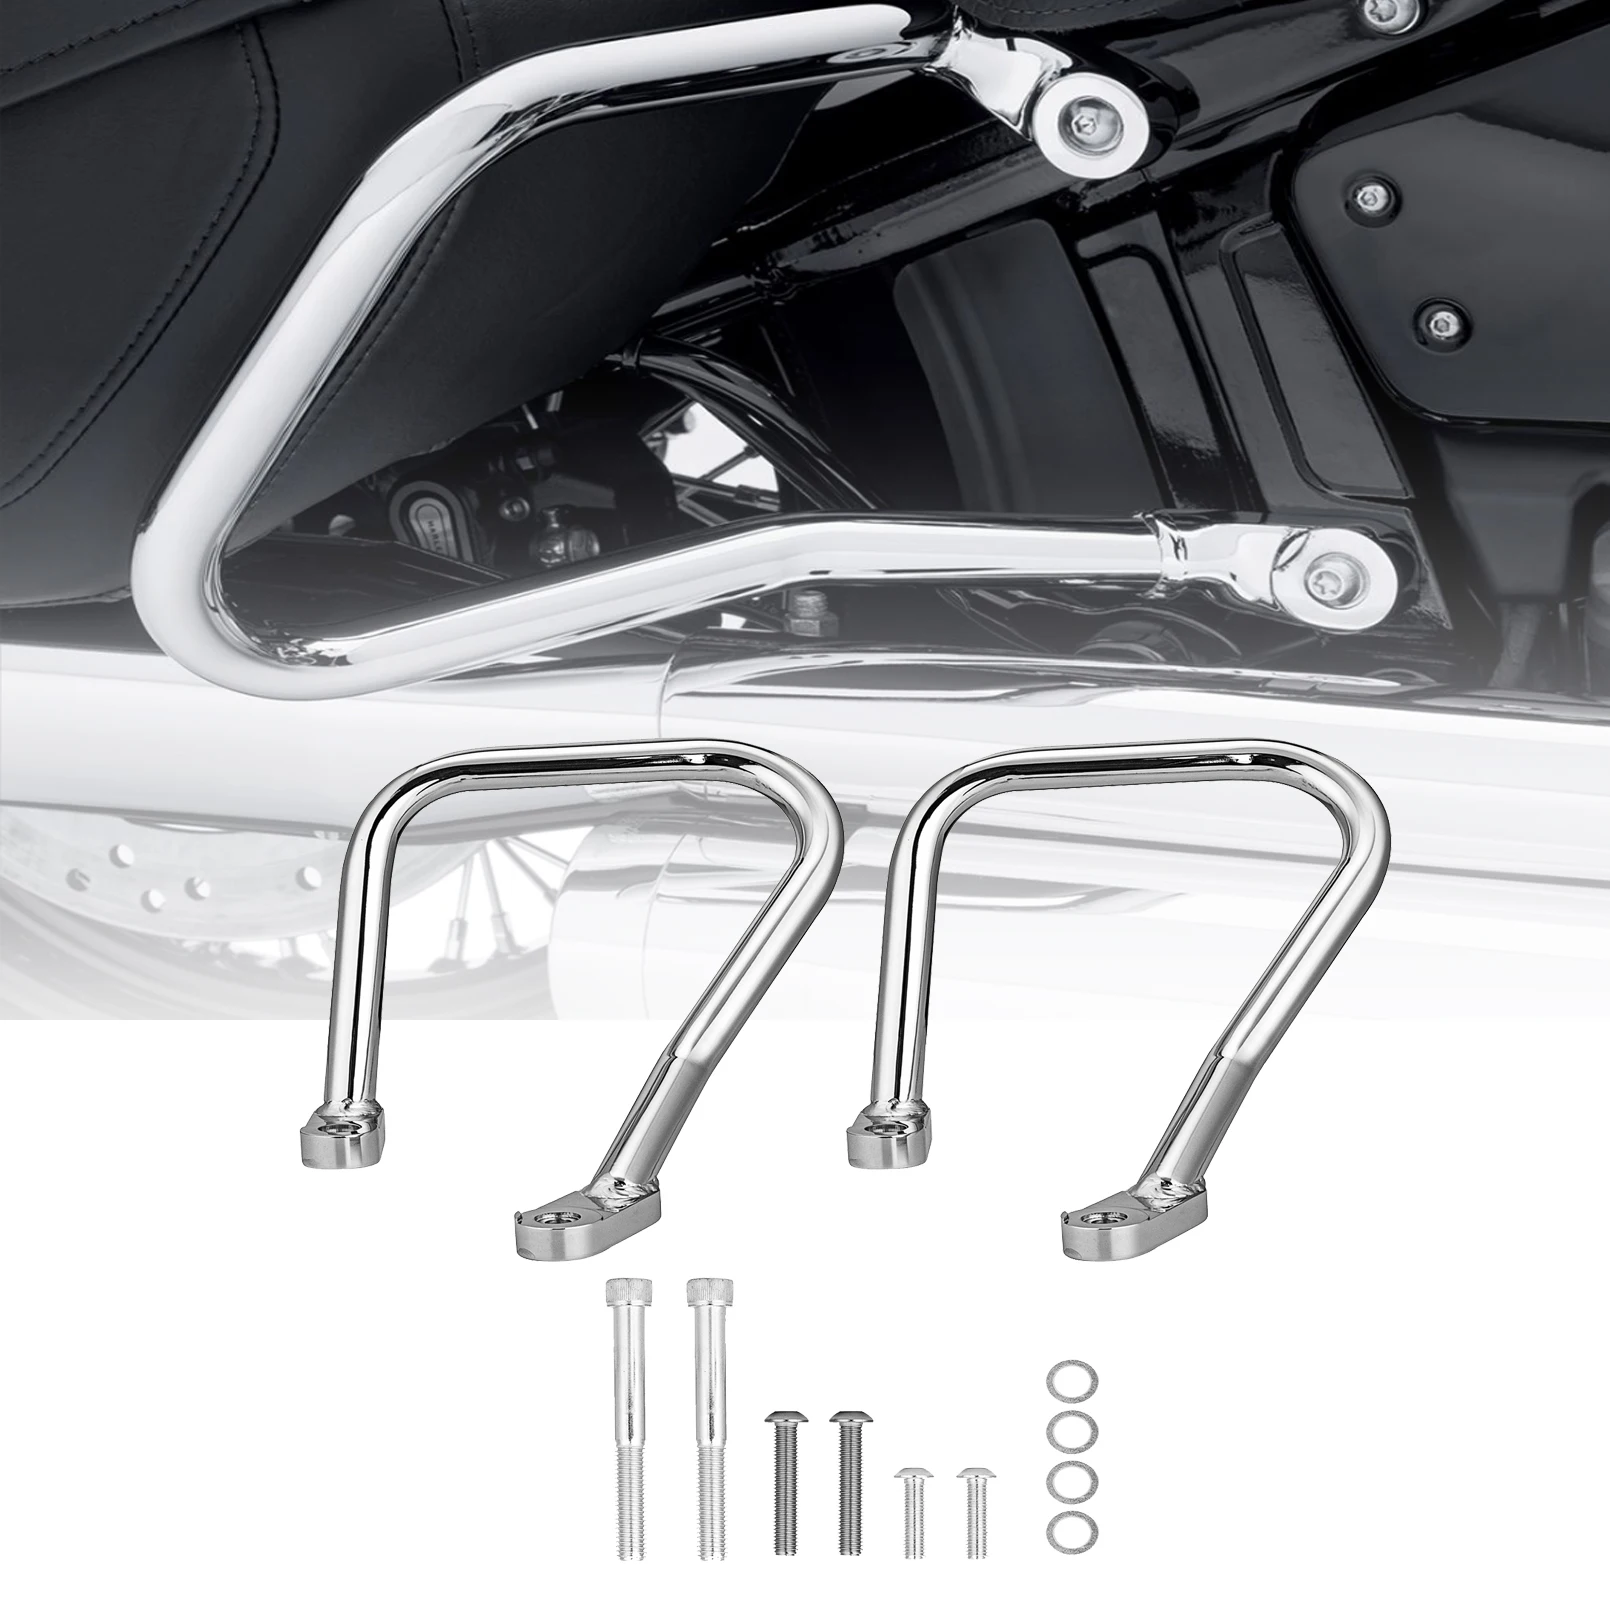 

For Harley FLHC FLHCS Softail Heritage Classic 2018-2021 Chrome Highway Rear Steel Saddlebag Guard Crash Bar Motorcycle Parts